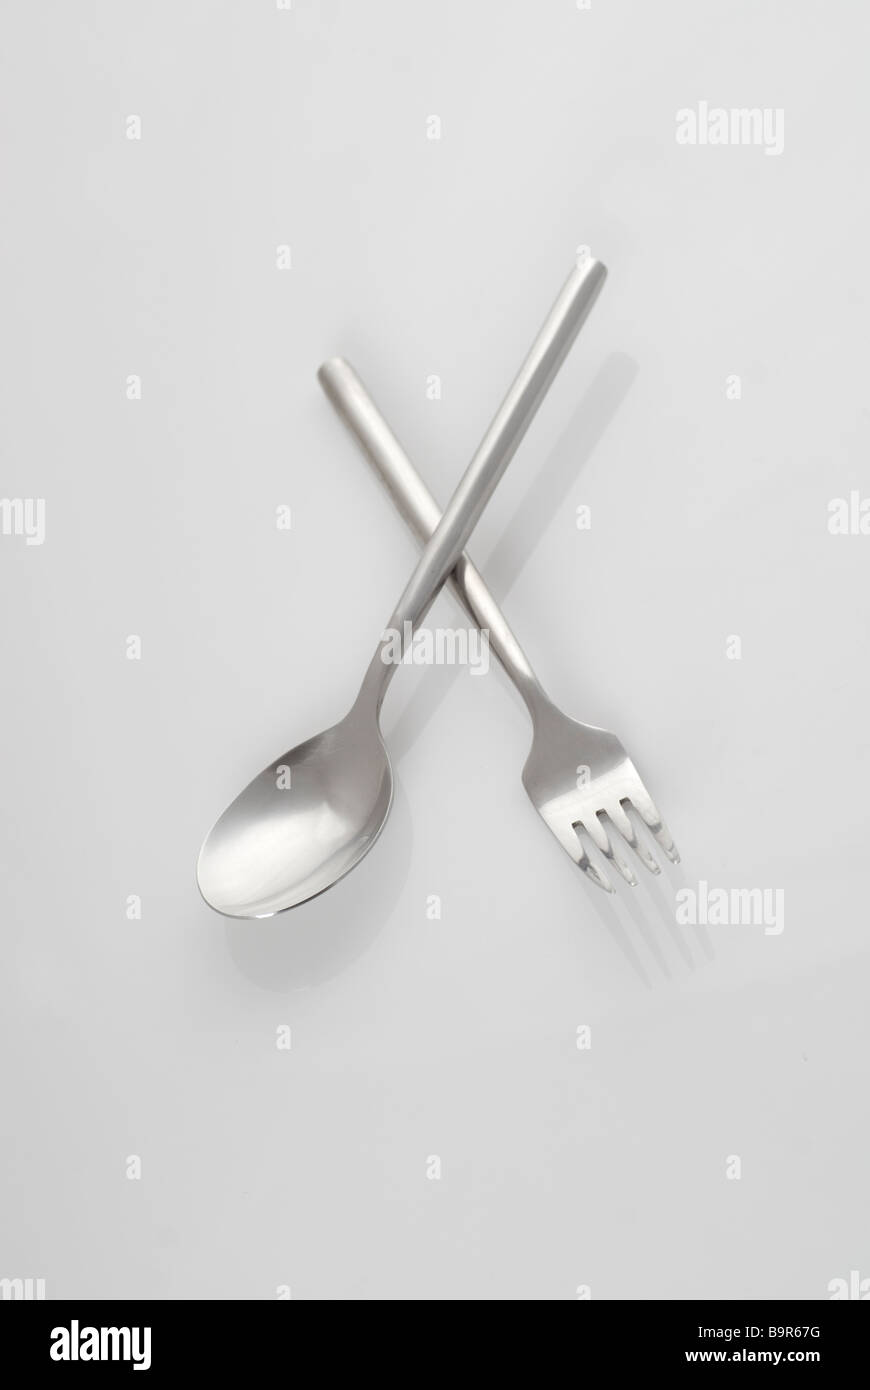 Spoon and fork eating utensils on a white background Stock Photo